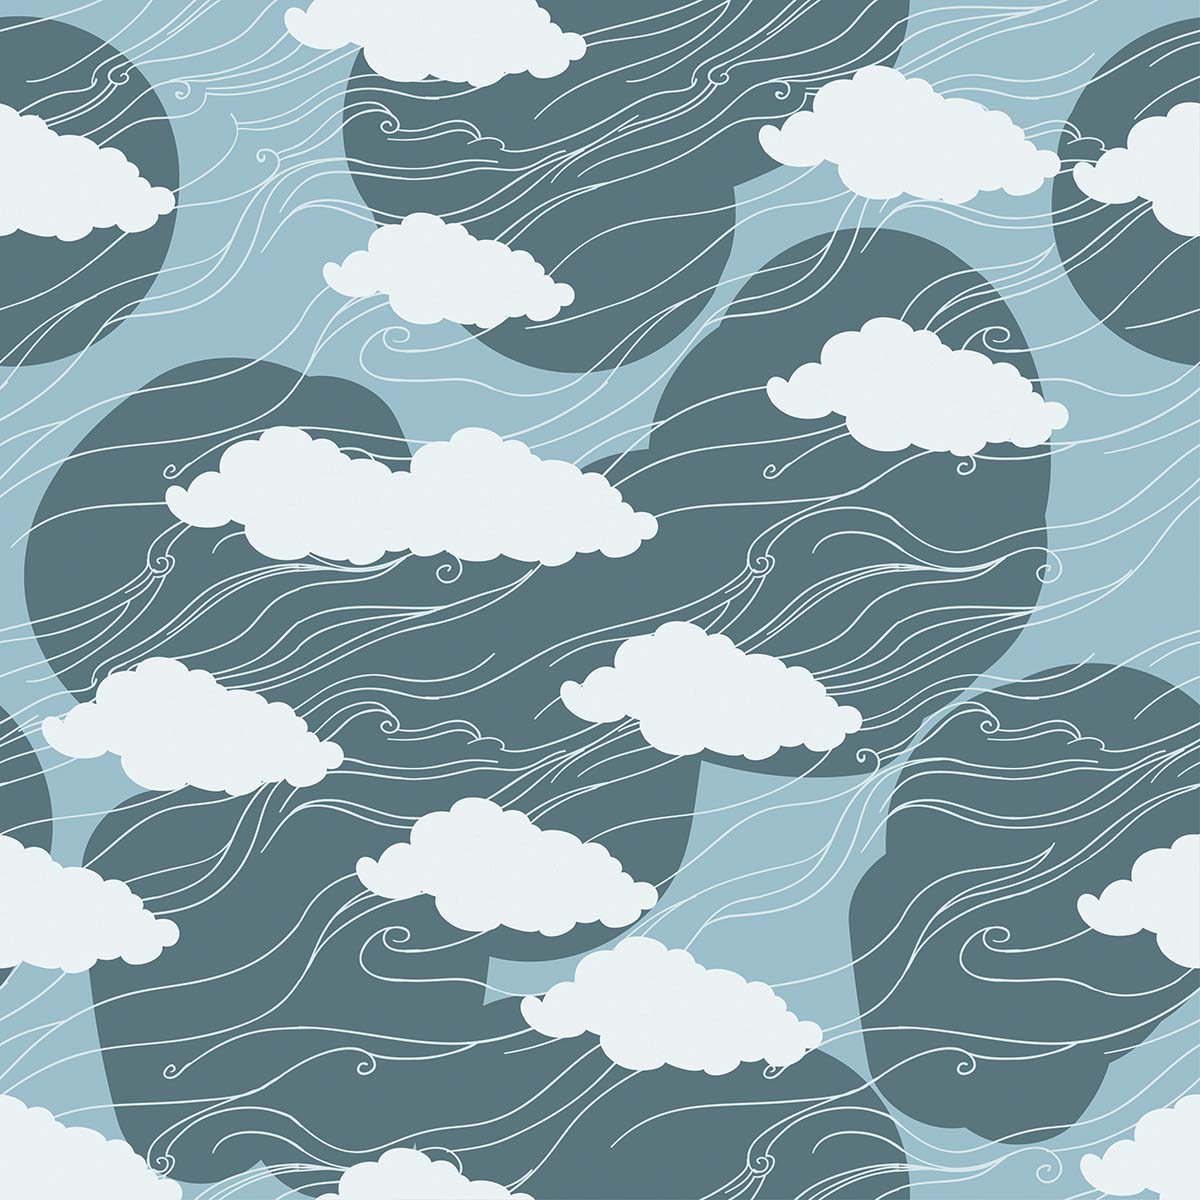 A pattern of clouds and waves